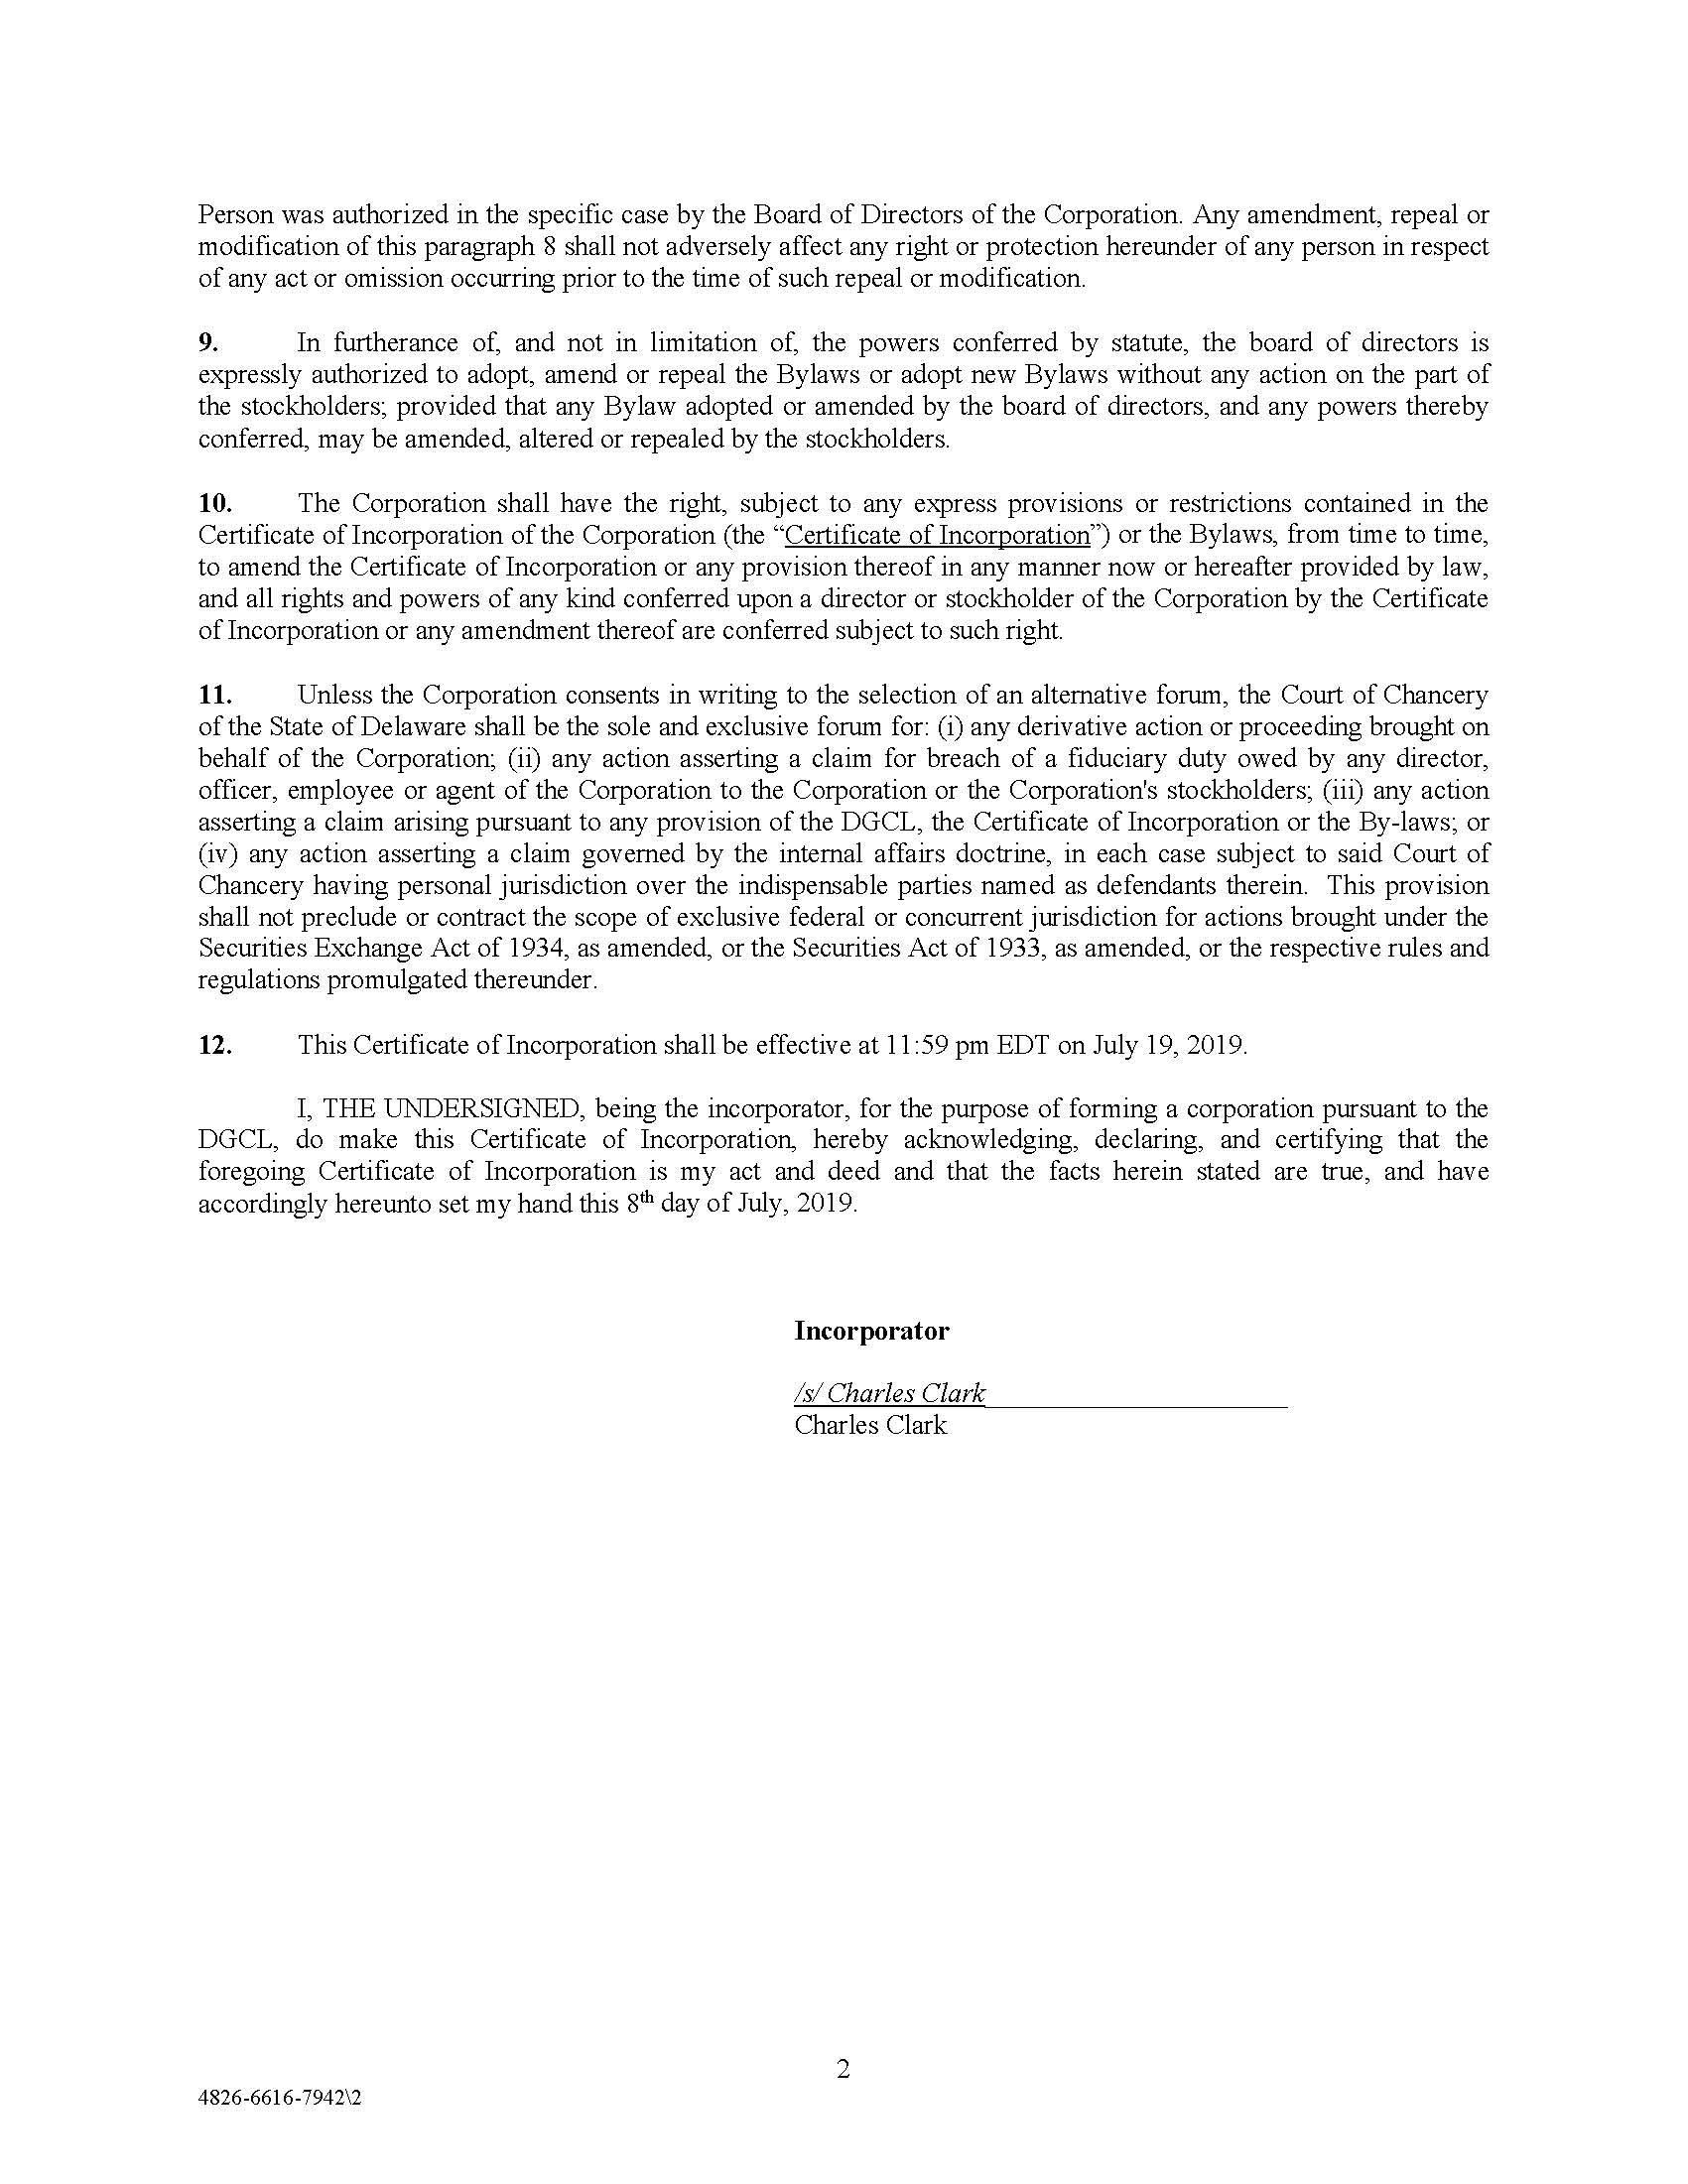 Kyto-  Certificate of Incorporation DE_Page_2.jpg